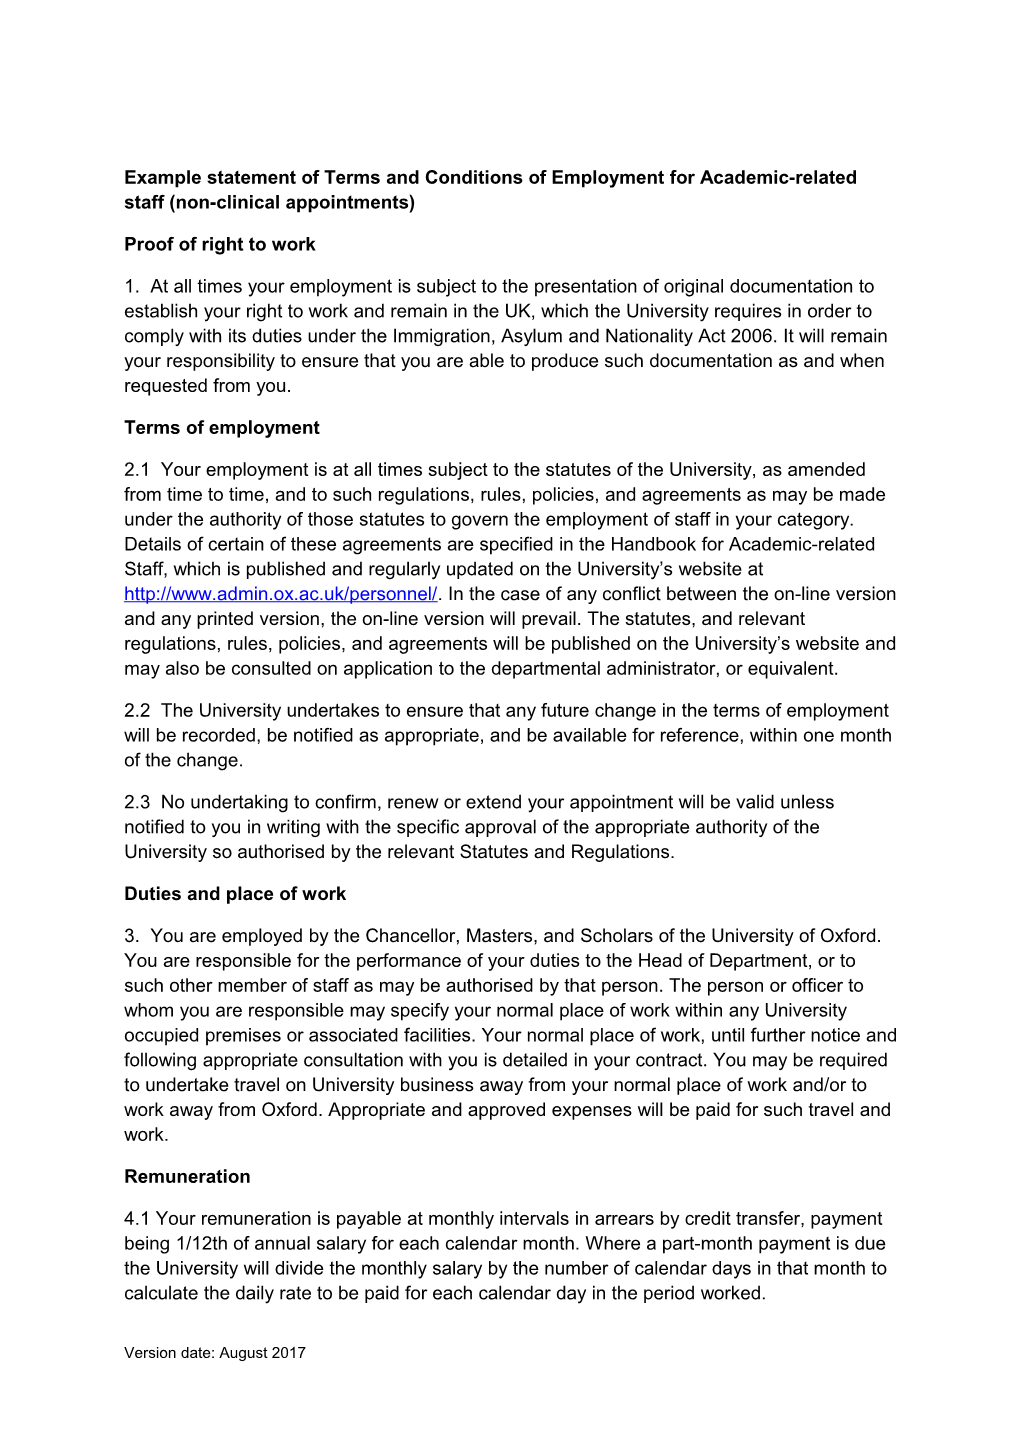 Example Statement of Terms and Conditions of Employment for Academic-Related Staff